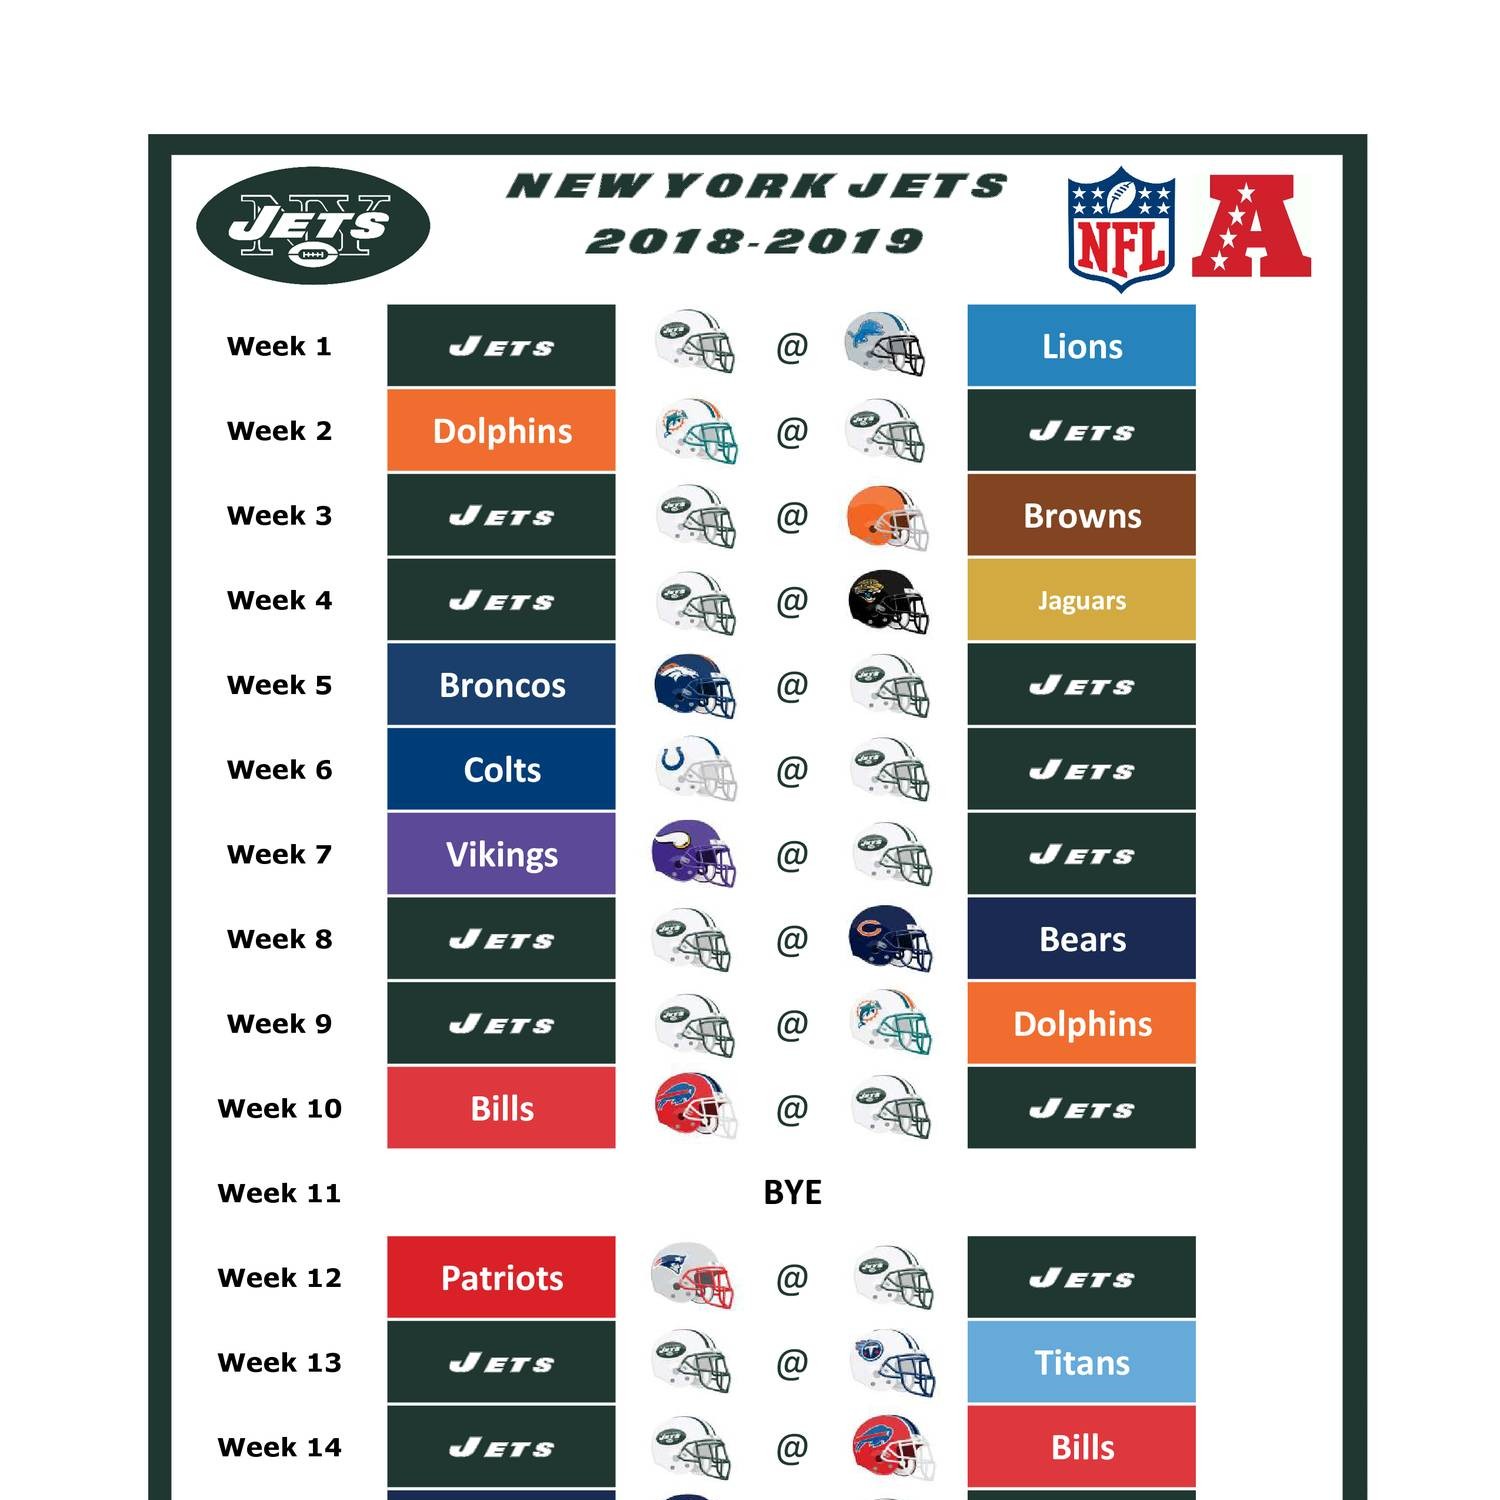 NY JETS Schedule.pdf DocDroid